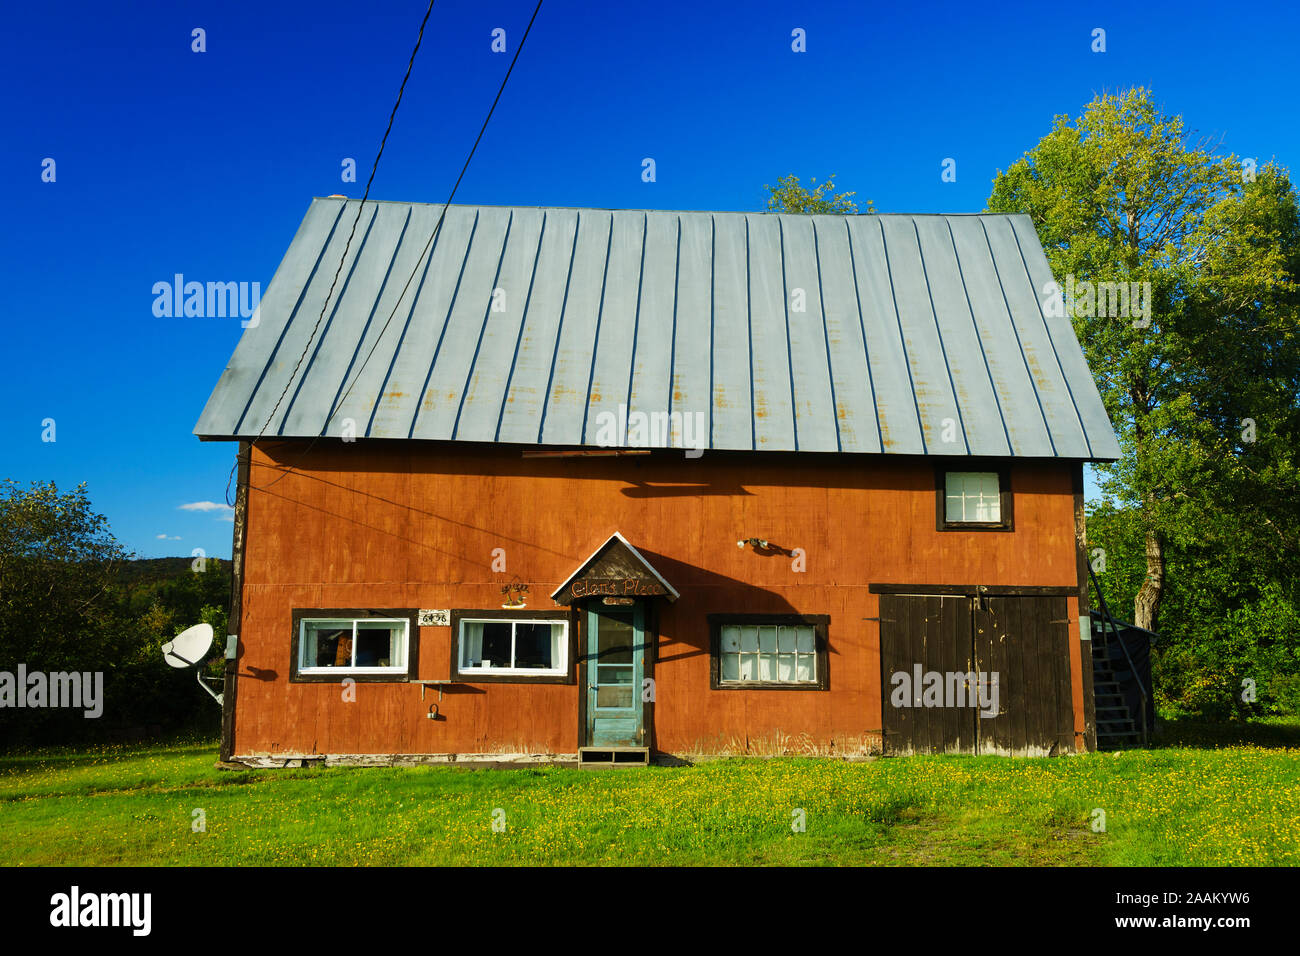 Old and crooked rural house with a metal roof, Island Pond, Vermont, USA. Stock Photo